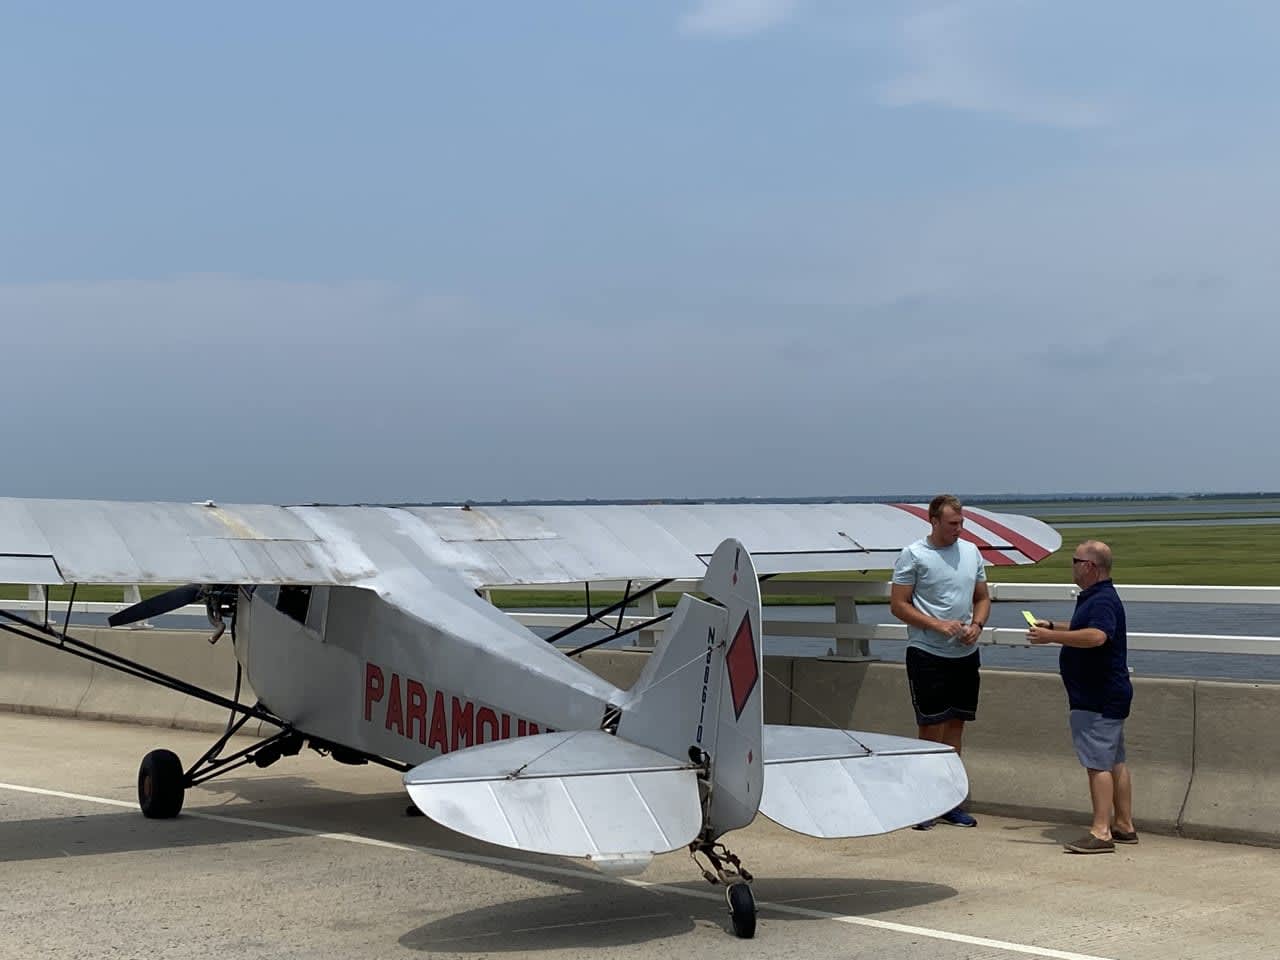 Landon Lucas (in blue) landed his banner plane in Ocean City Monday afternoon.